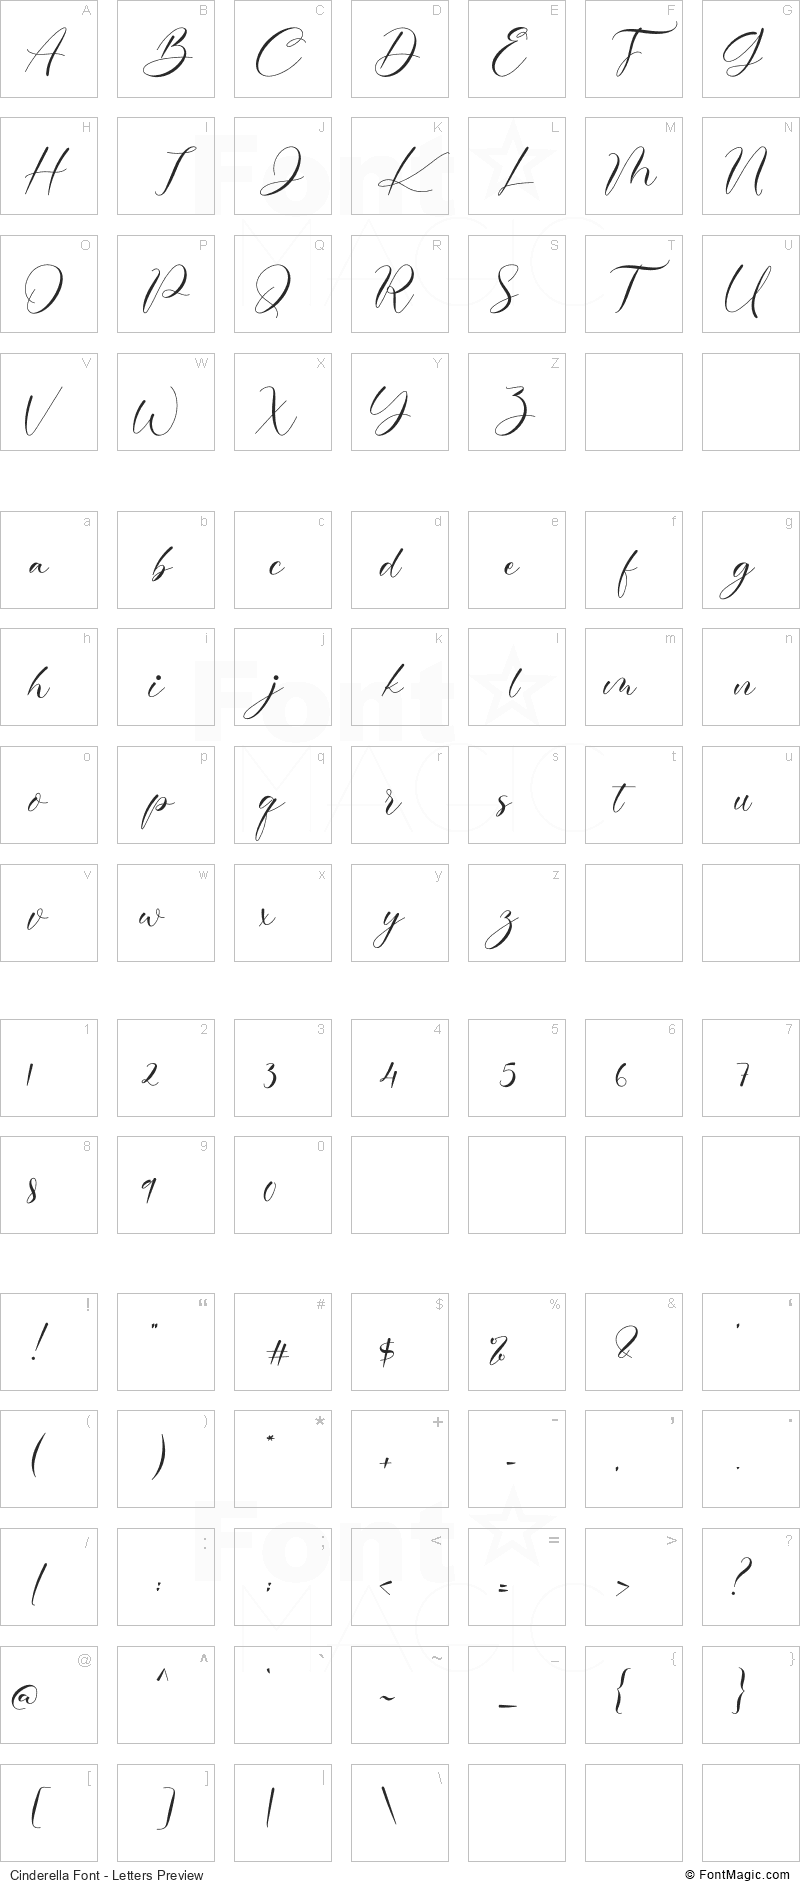 Cinderella Font - All Latters Preview Chart